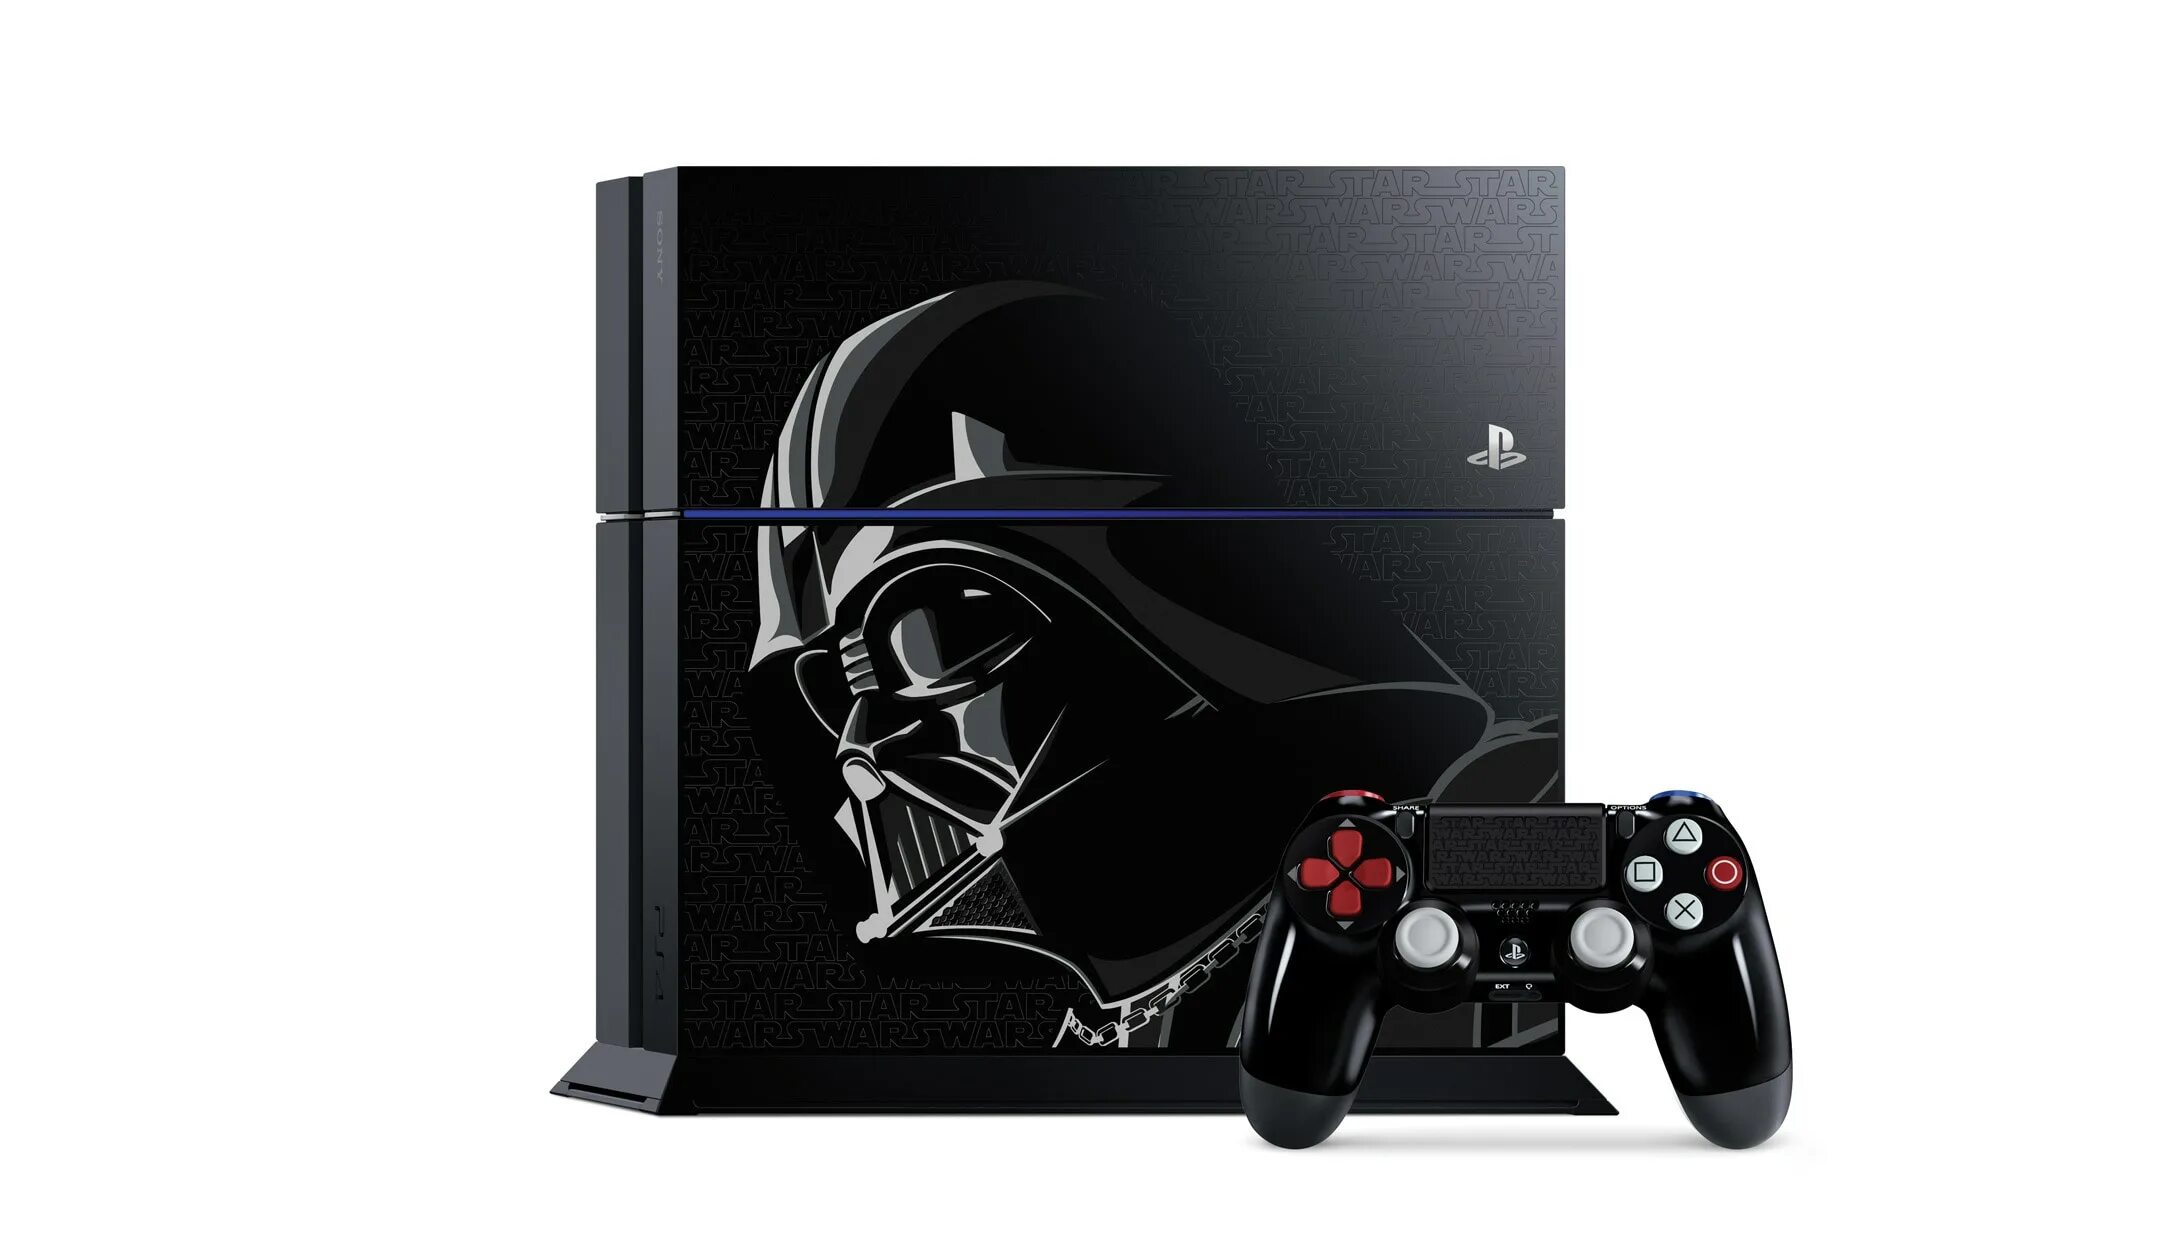 PLAYSTATION 4 1tb Star Wars Limited Edition. Sony PLAYSTATION 4 Pro Star Wars. Sony ps4 Star Wars Console. Ps4 Darth Vader Edition. Ps4 stories